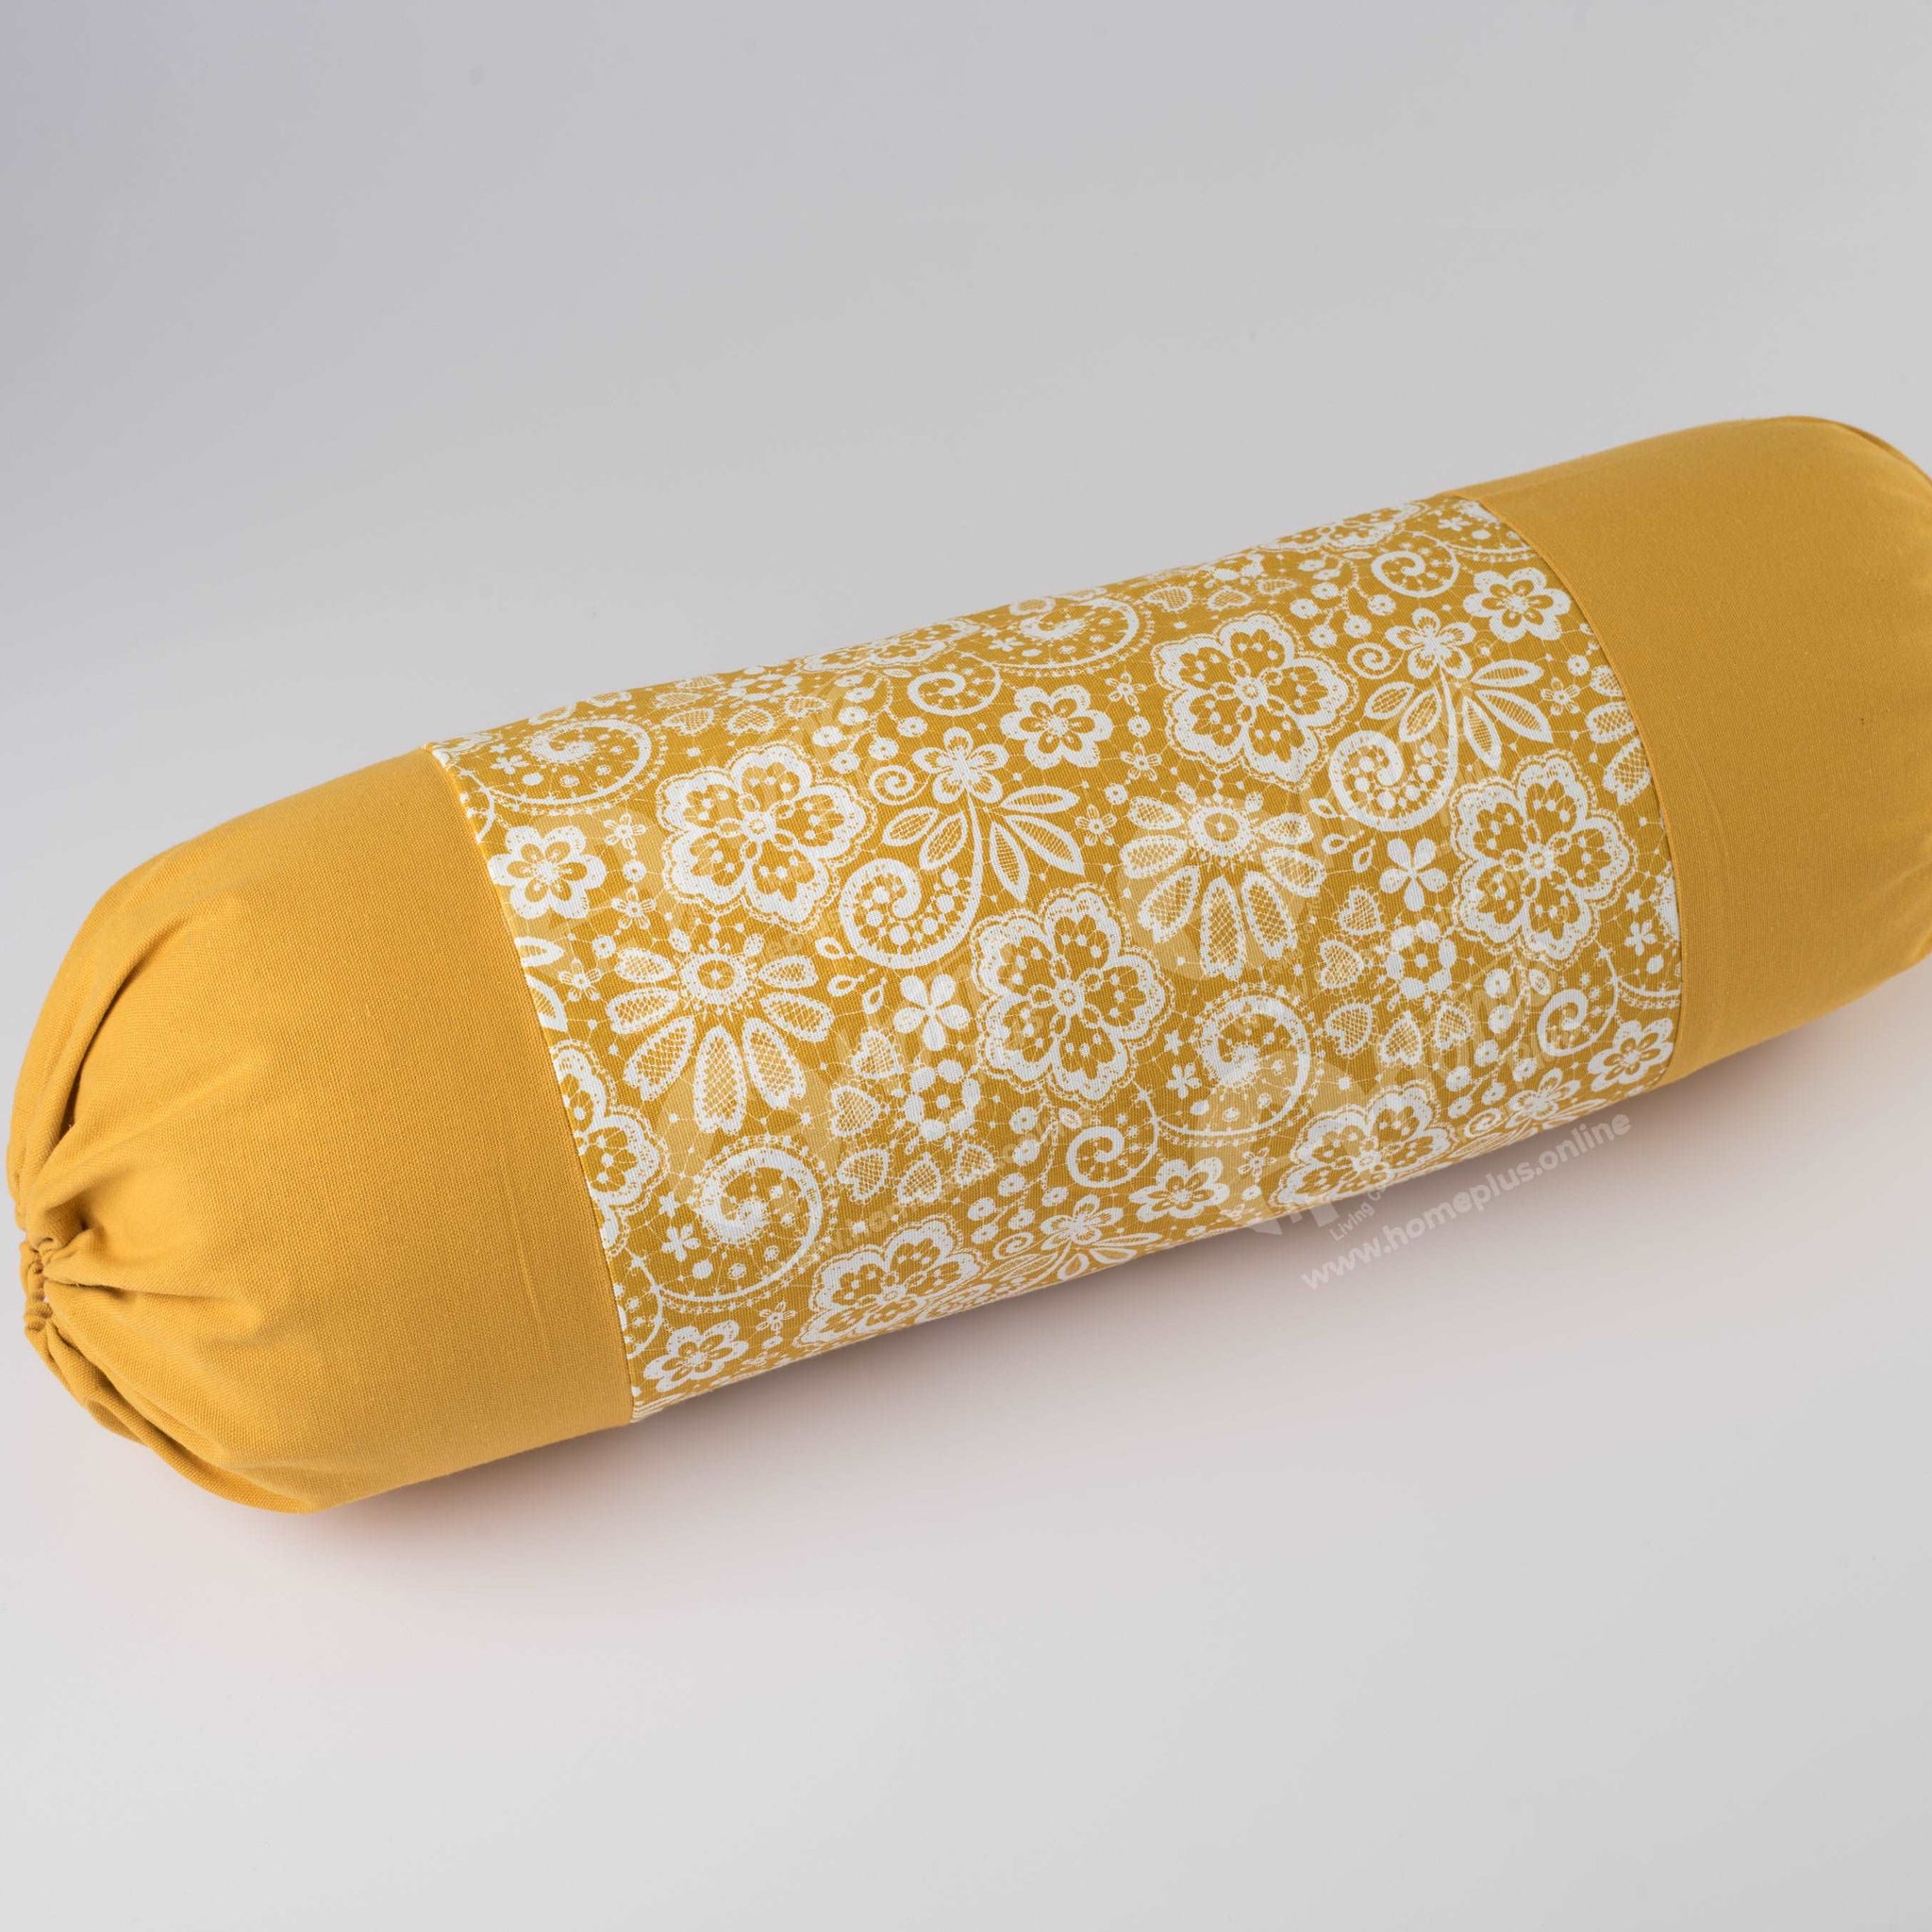 Bolster Cover - Lace Mustard